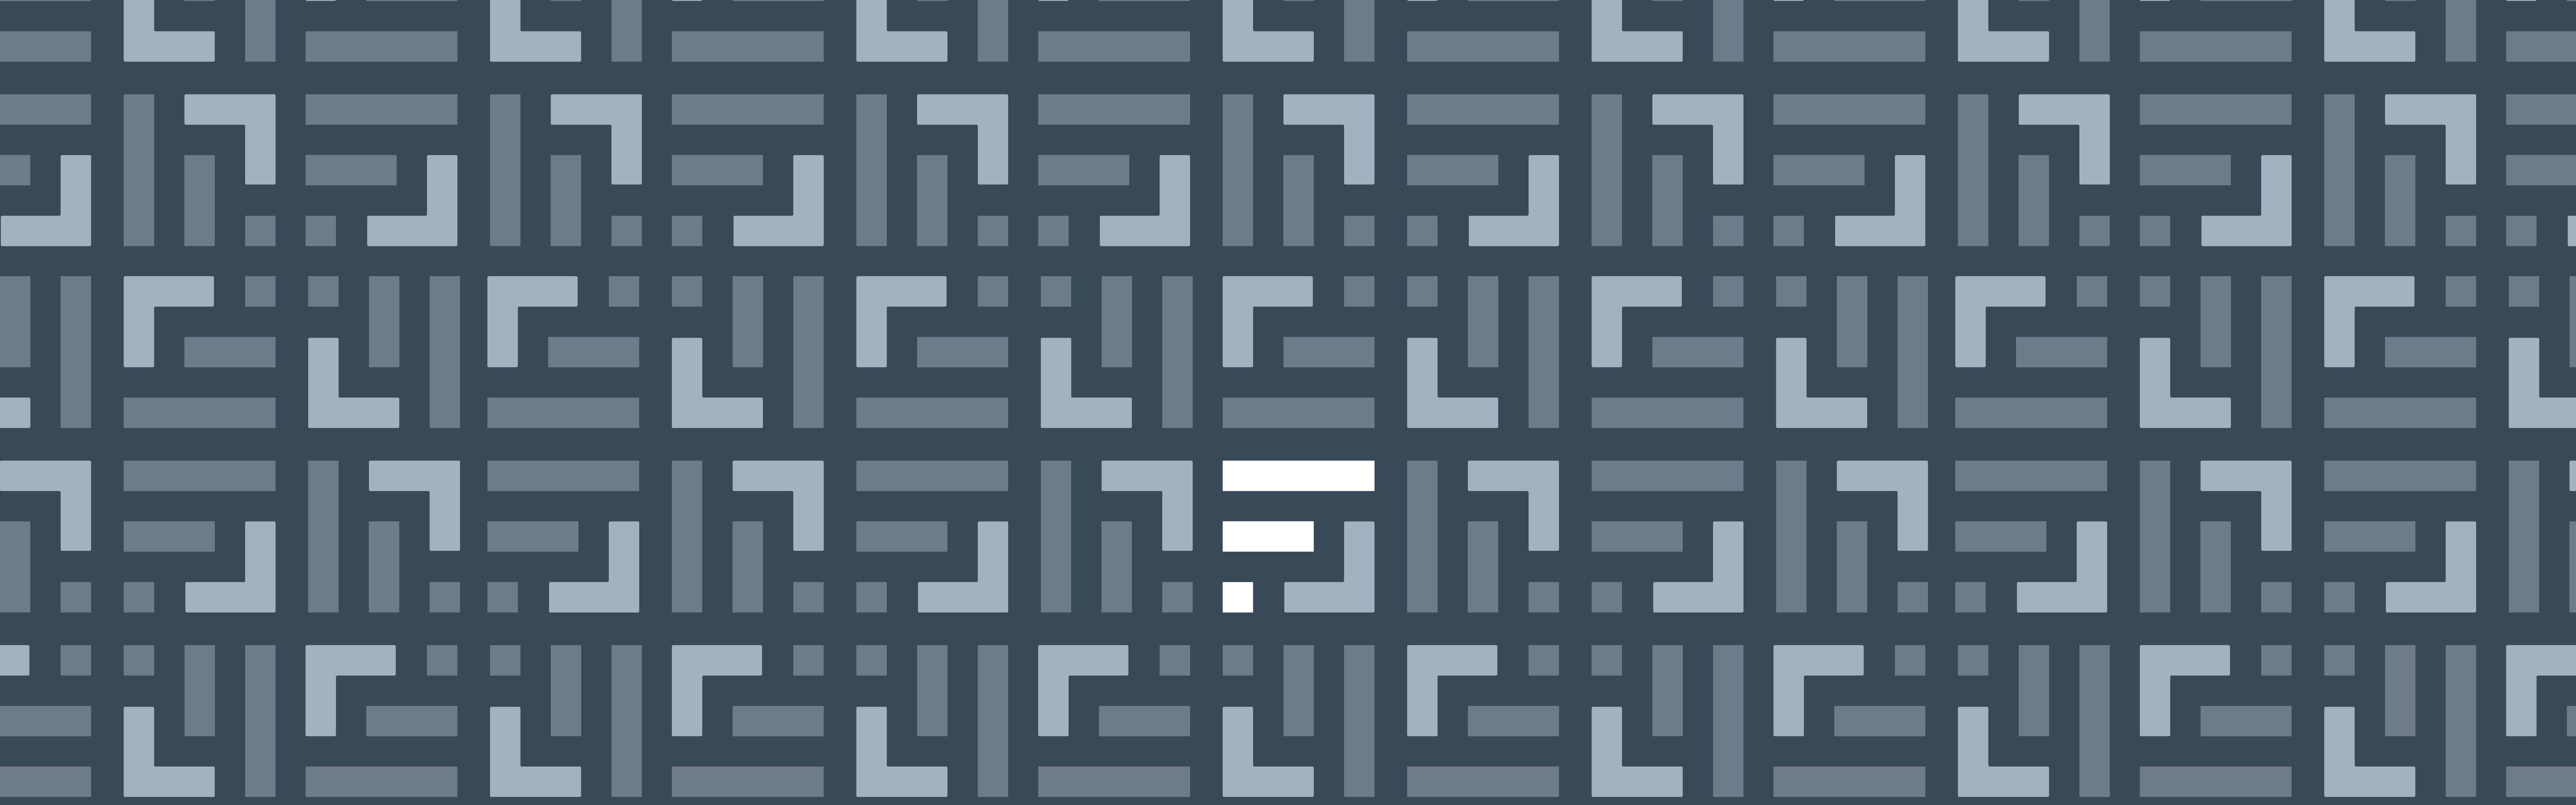 A 2d maze with a complex grid pattern and a single point of entry at the top, with the goal located towards the center represented by a different colored square.